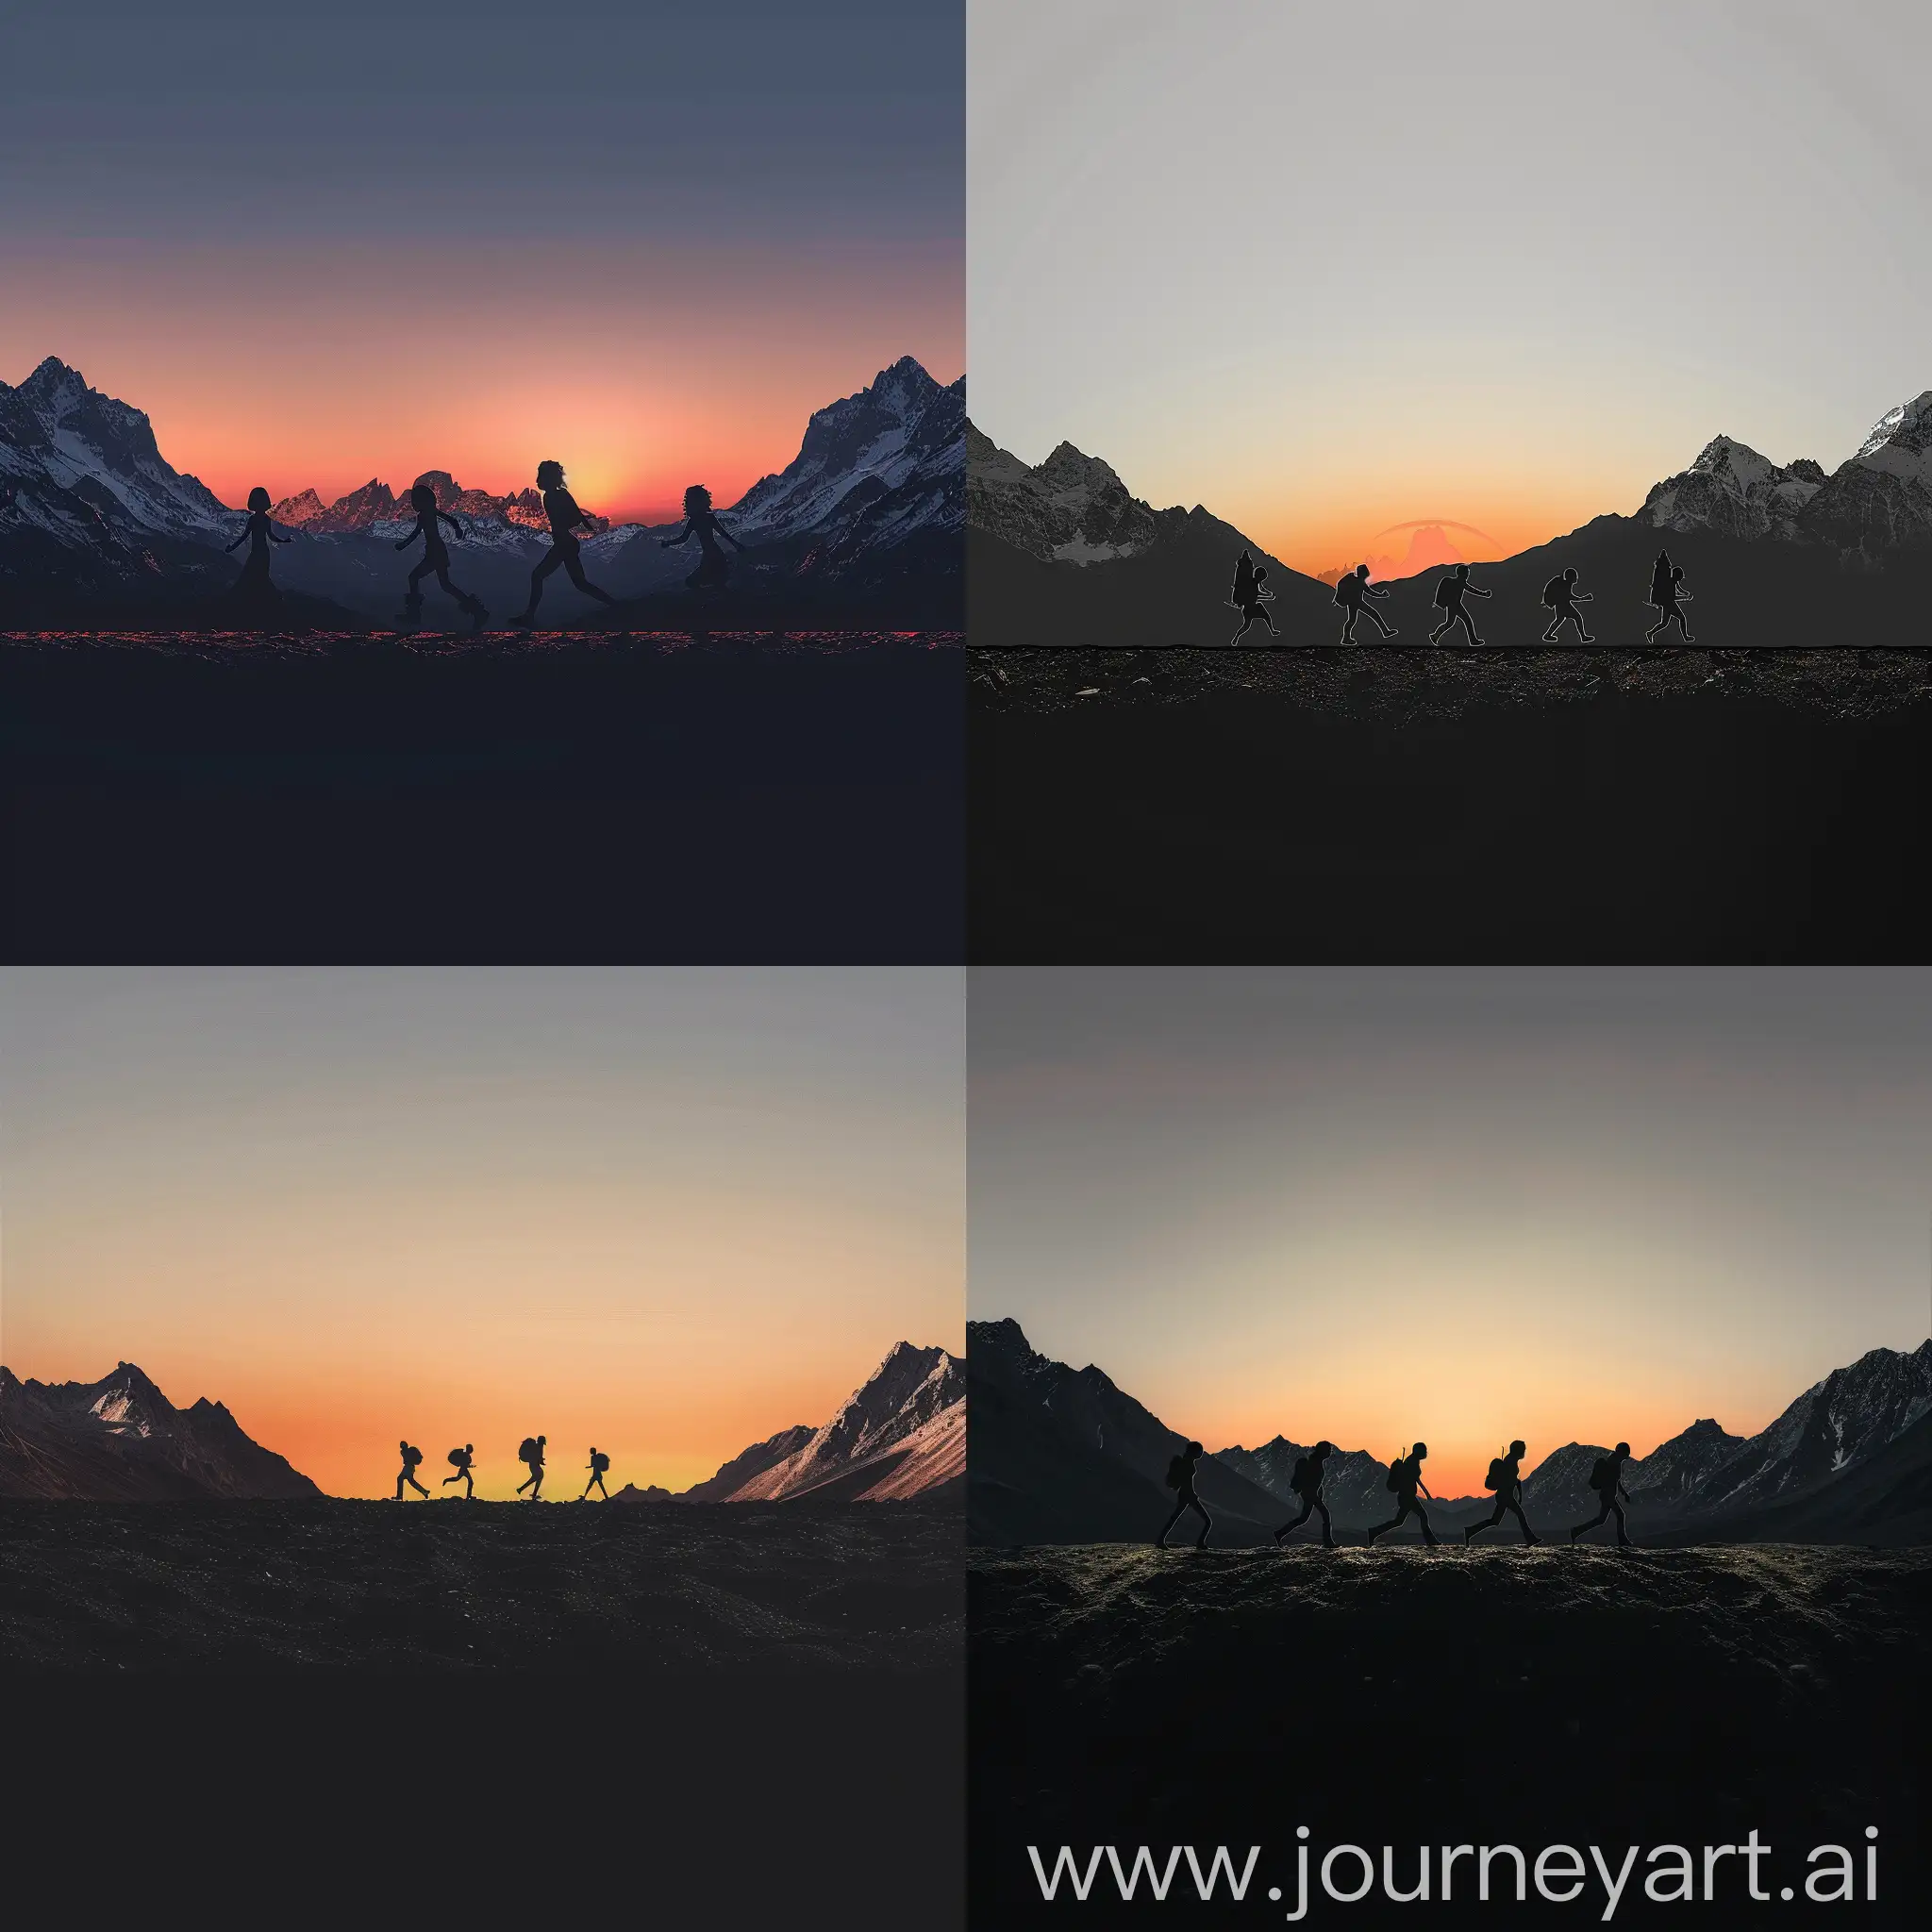 clear sunset, mountains left and right, silhouettes of four fantasy small travelers compared to the mountains in the center running to right, front view, beneath image black earth, side view